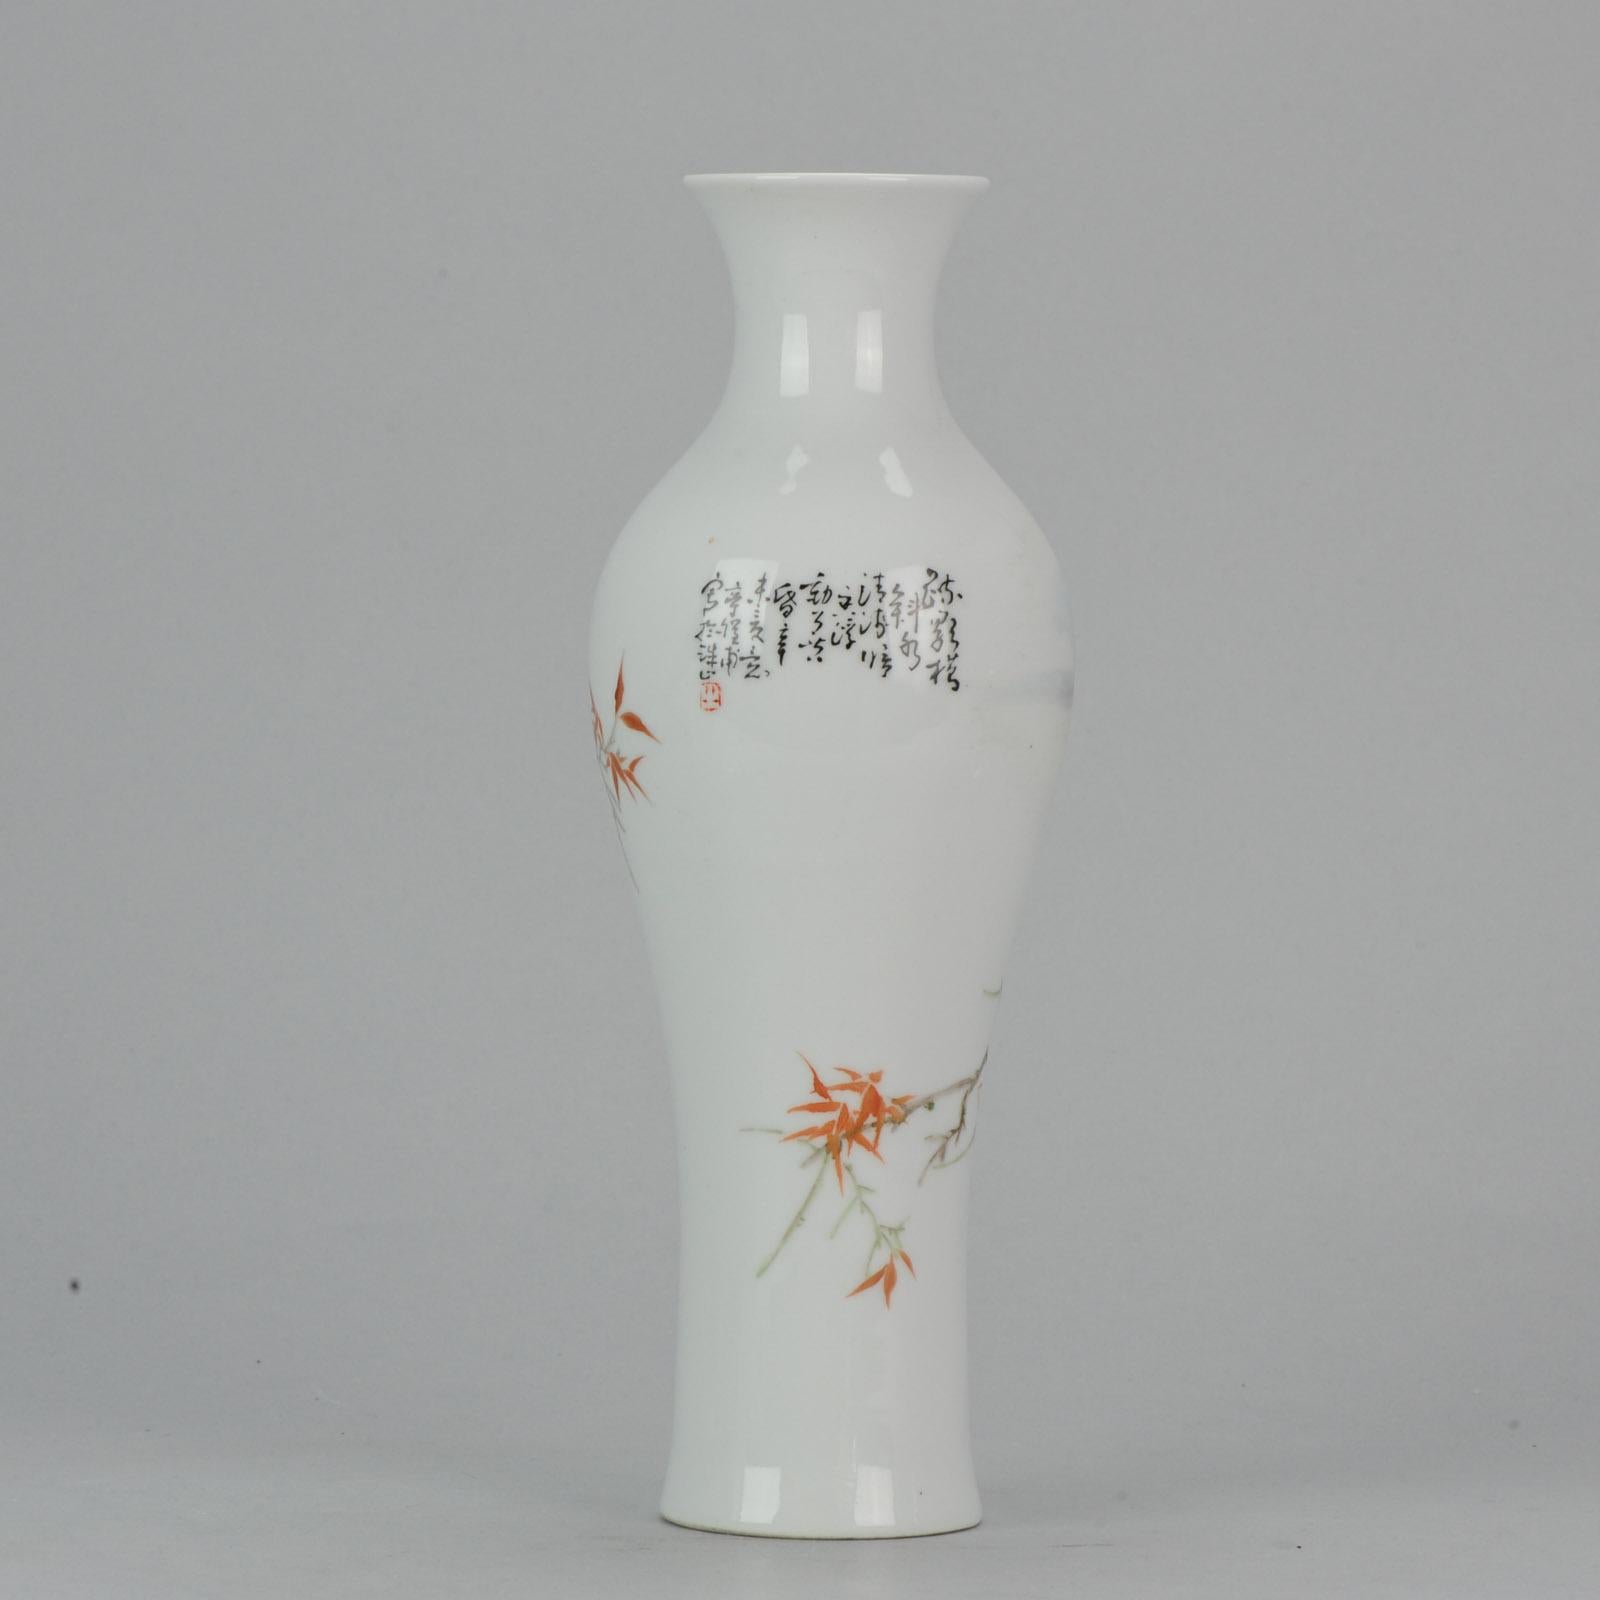 Very nice vase with a stunning floral decoration.

Additional information:
Material: Porcelain & Pottery
Original/Reproduction: Original
Region of Origin: China
Period: 19th century, 20th century Proc (1949 - now)
Condition: Overall Condition